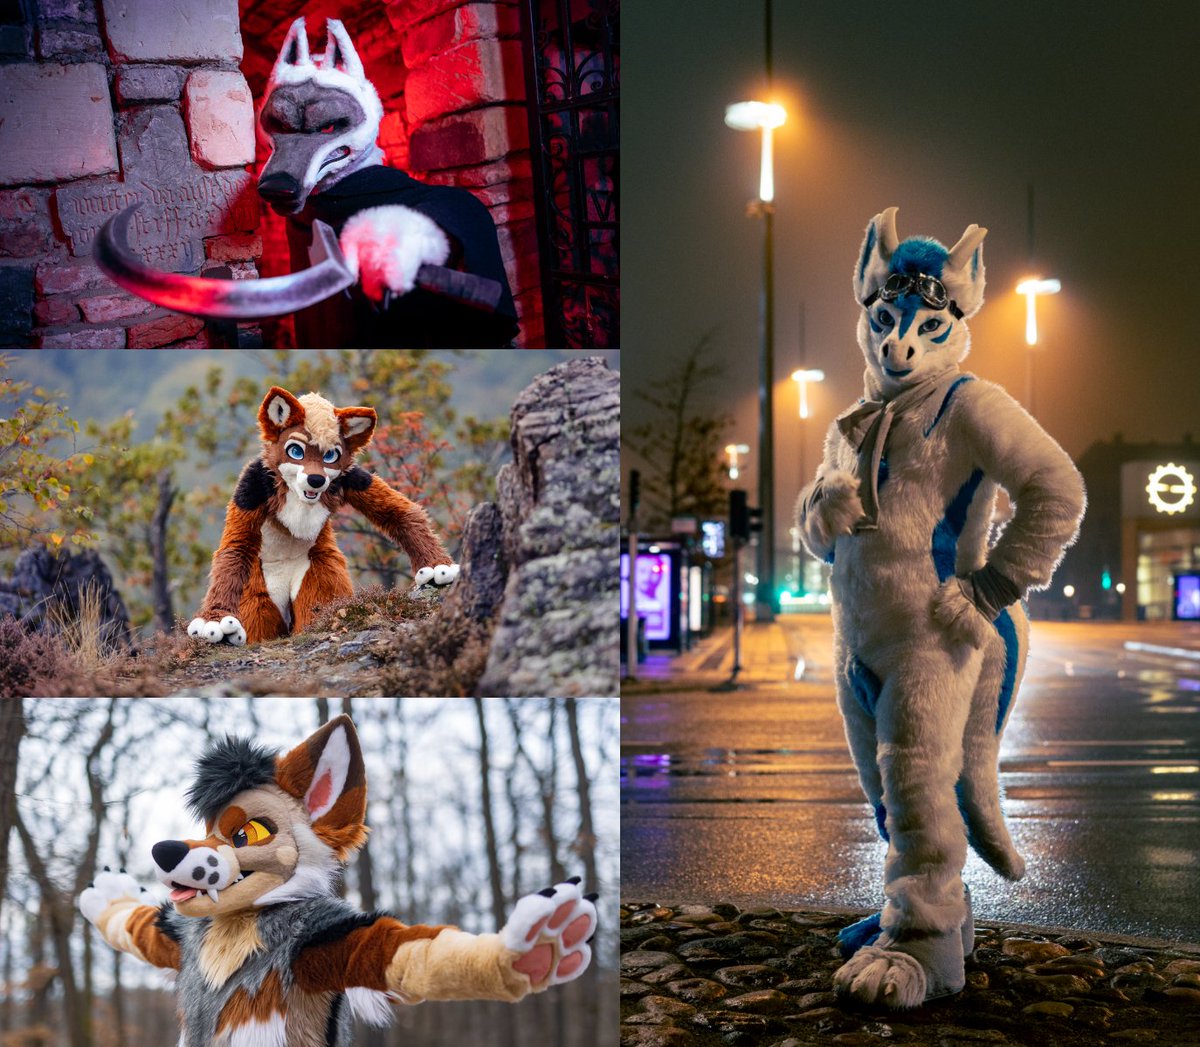 A new batch of wallpapers to sweeten #FursuitFriday for my patrons. If you feel like supporting my work too, link in the comment :)
Yay for the diversity of styles and locations one can find in furry fundom!

🐺 @FaolanPanriel 
🐺 @FlupVolta 
🐺 @jackal_husband_ 
🐲 @Bluehasia